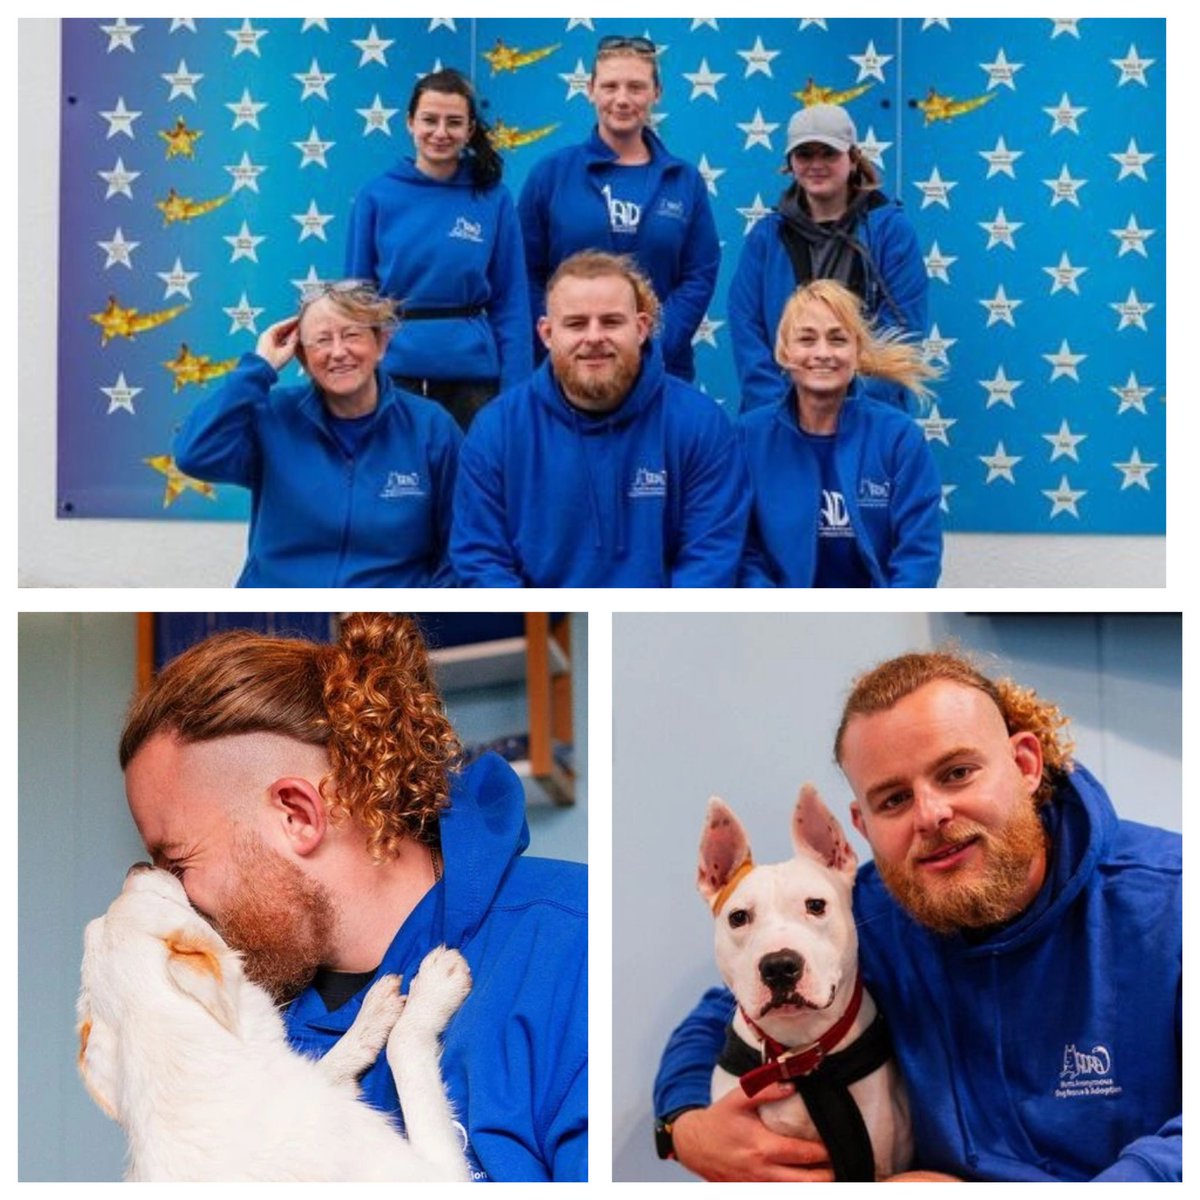 🎉 Congratulations to our Ambassador Finlay Bealham who made his 200th cap 🎉 🙏Thank you, Finlay, for your support to MADRA, we and all our dogs are so grateful 🙏 💙 Helping us help unwanted, abandoned & neglected dogs 💙 @FinlayBealham #AdoptDontShop #Galway #rescuedog